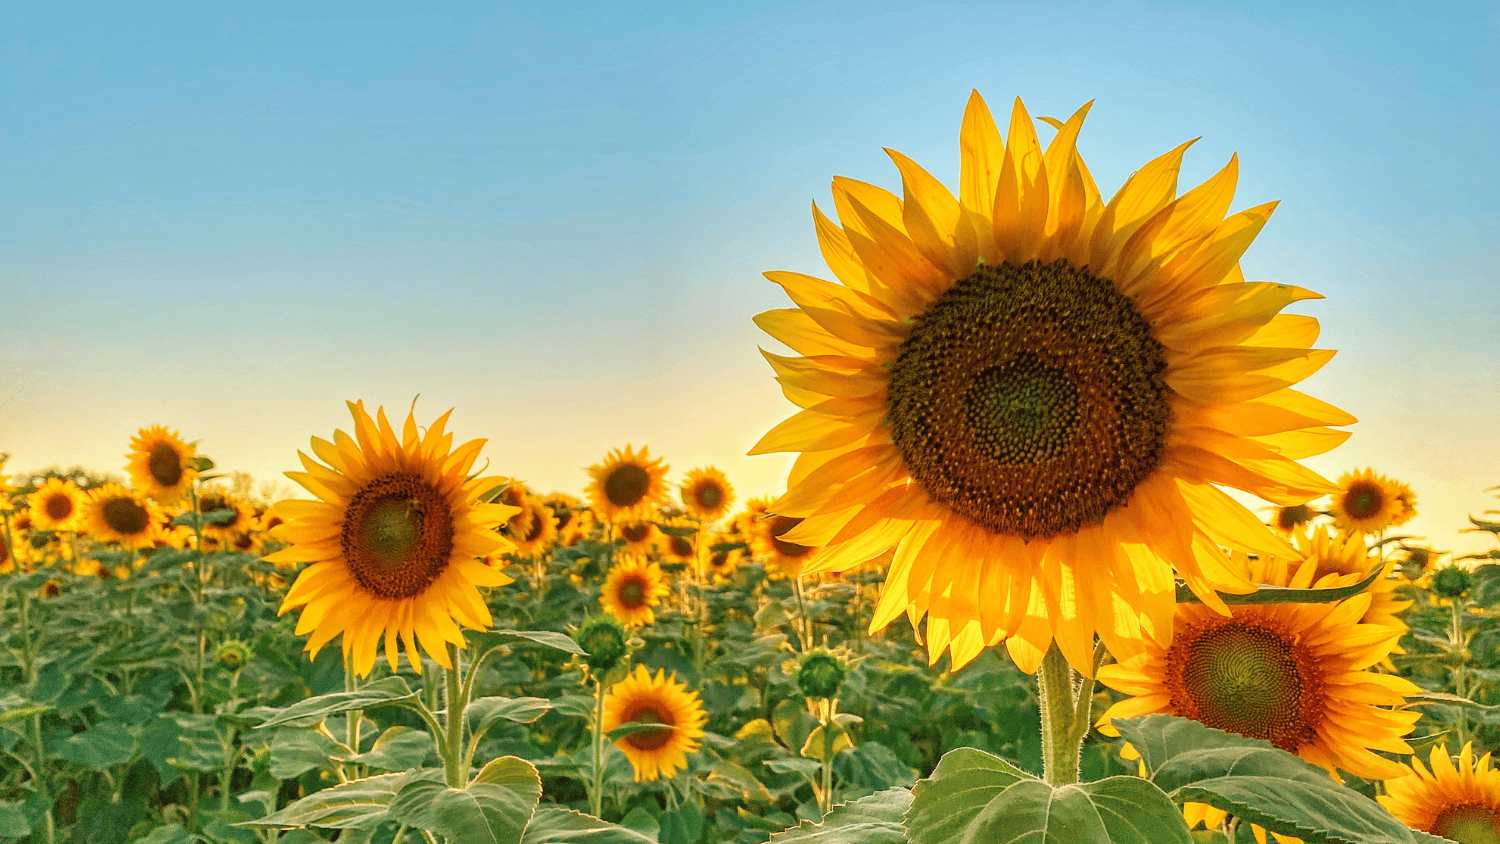 A field of sunflowers on a sunny day.